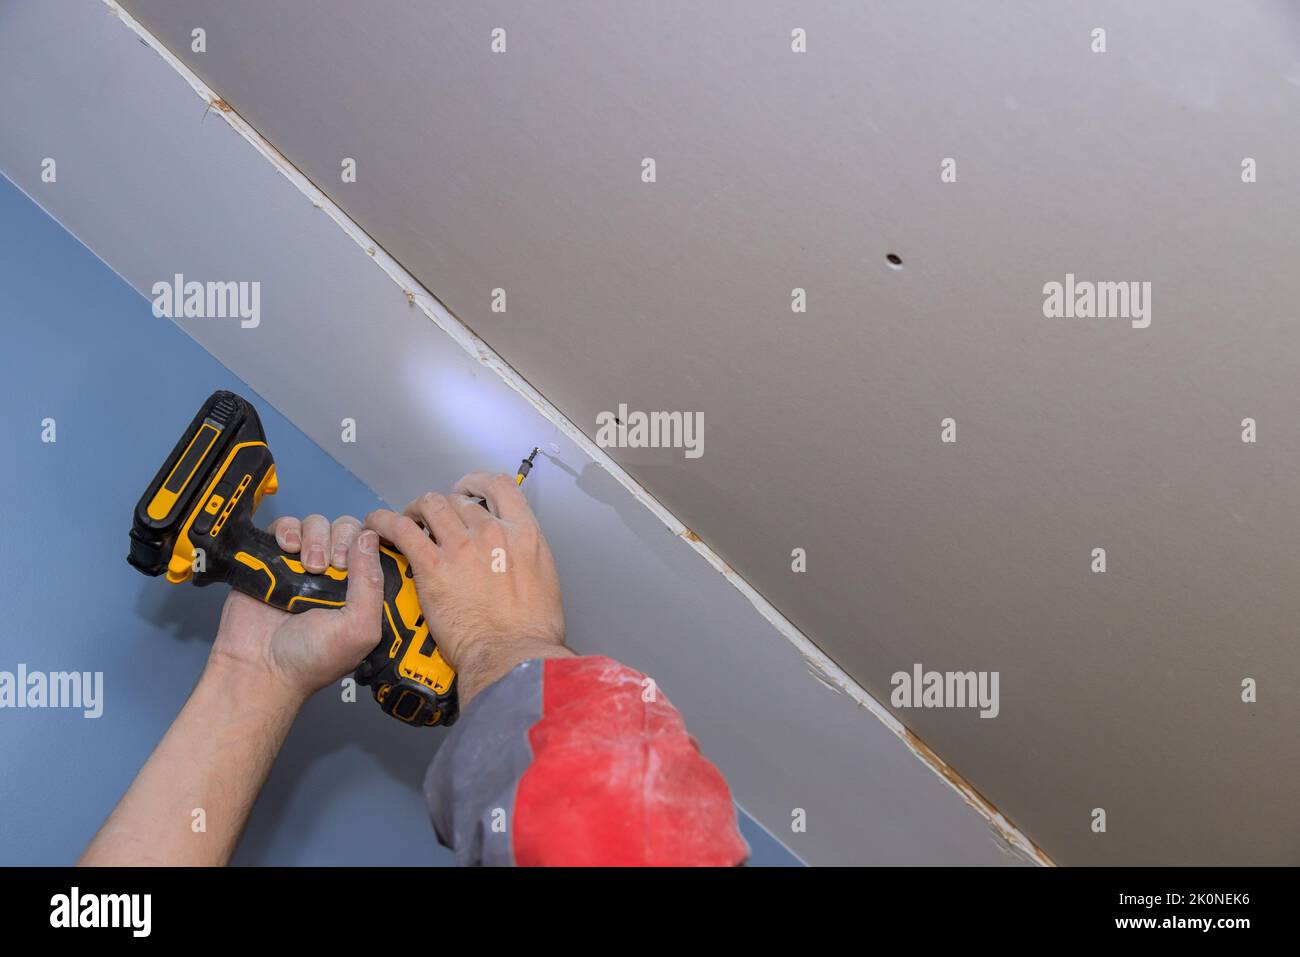 Screwing drywall to the ceiling with worker using screwdriver Stock Photo